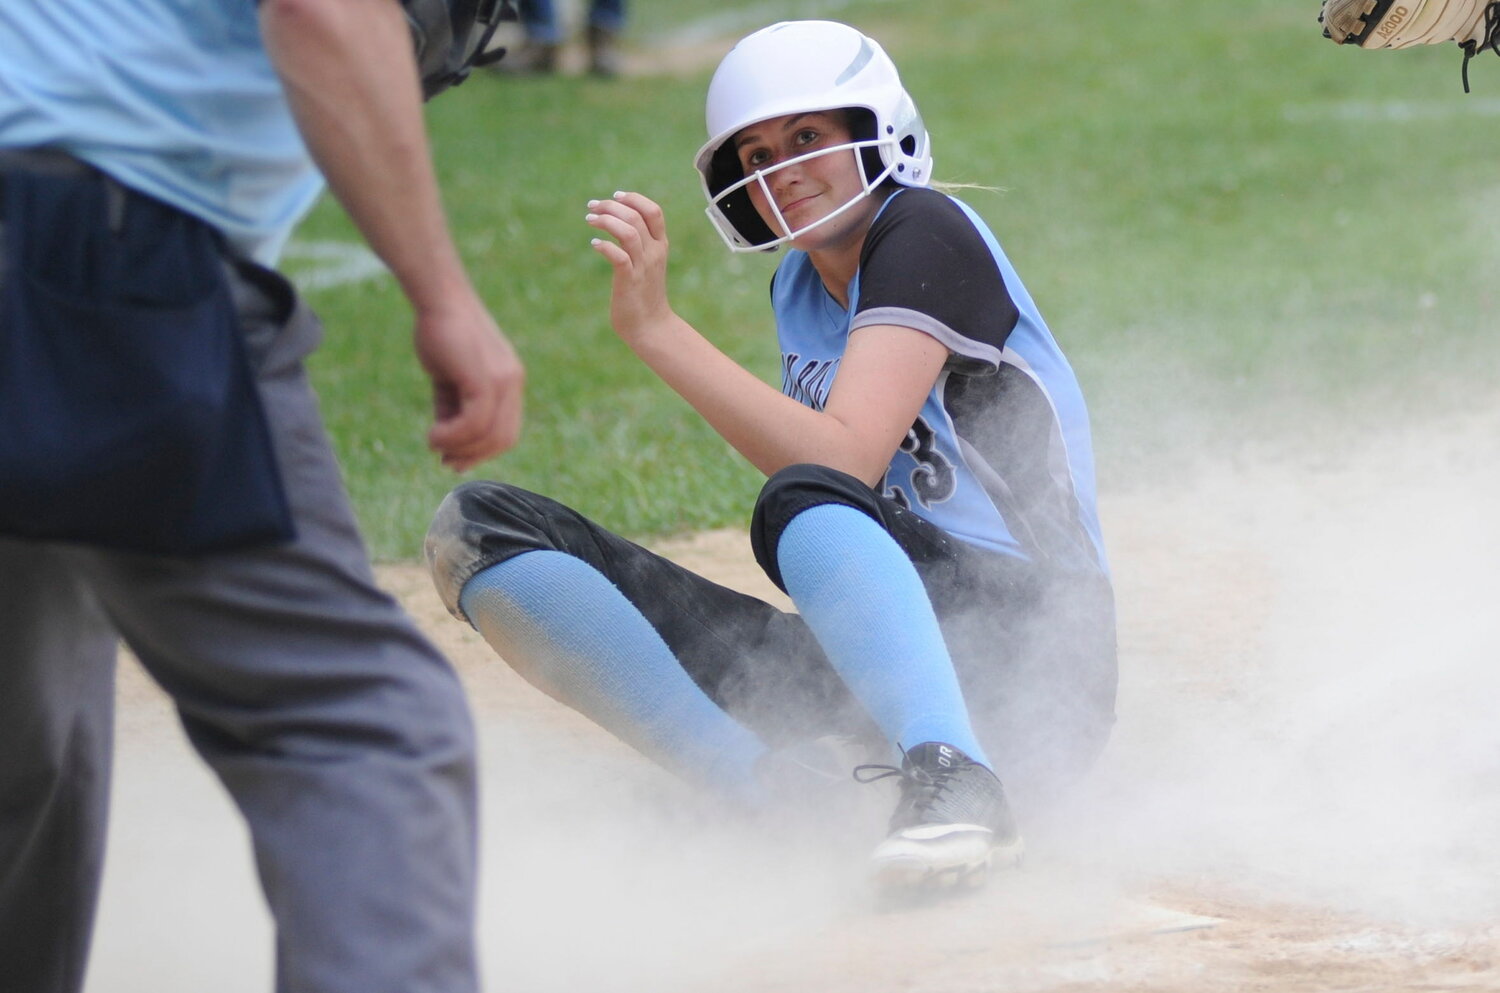 Anticipation! Sullivan West’s Elaine Herbert slides across the plate and looks to the home plate ump for “the call.”